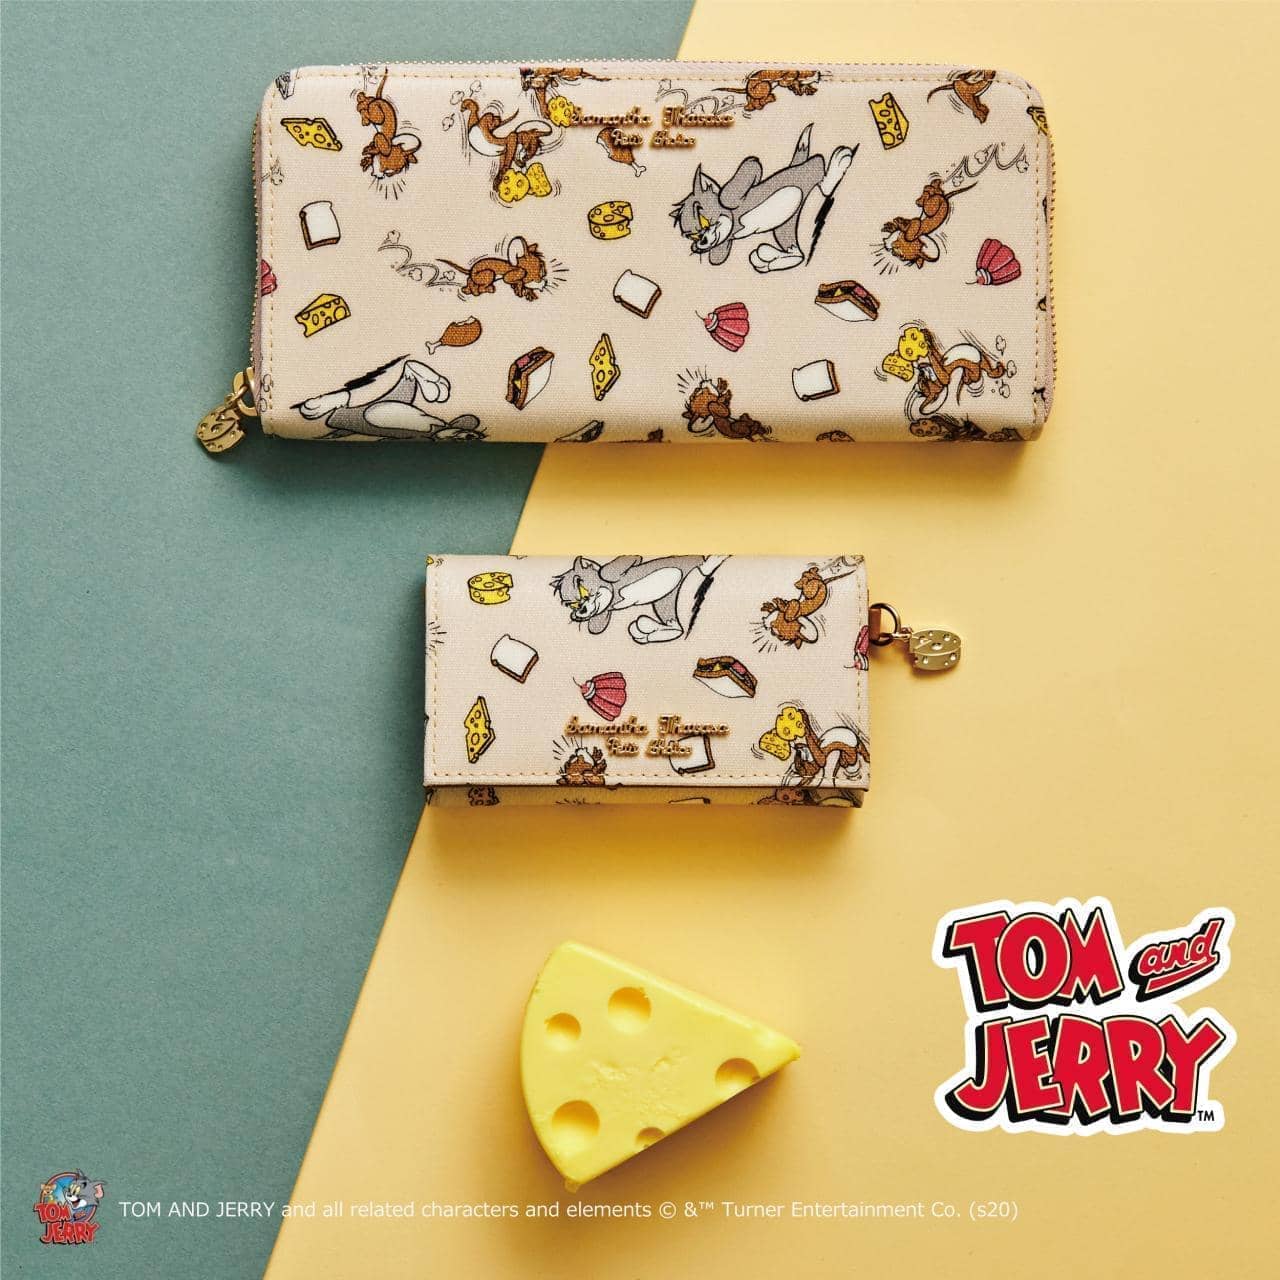 Samantha Thavasa Petit Choice "Tom and Jerry" Collection